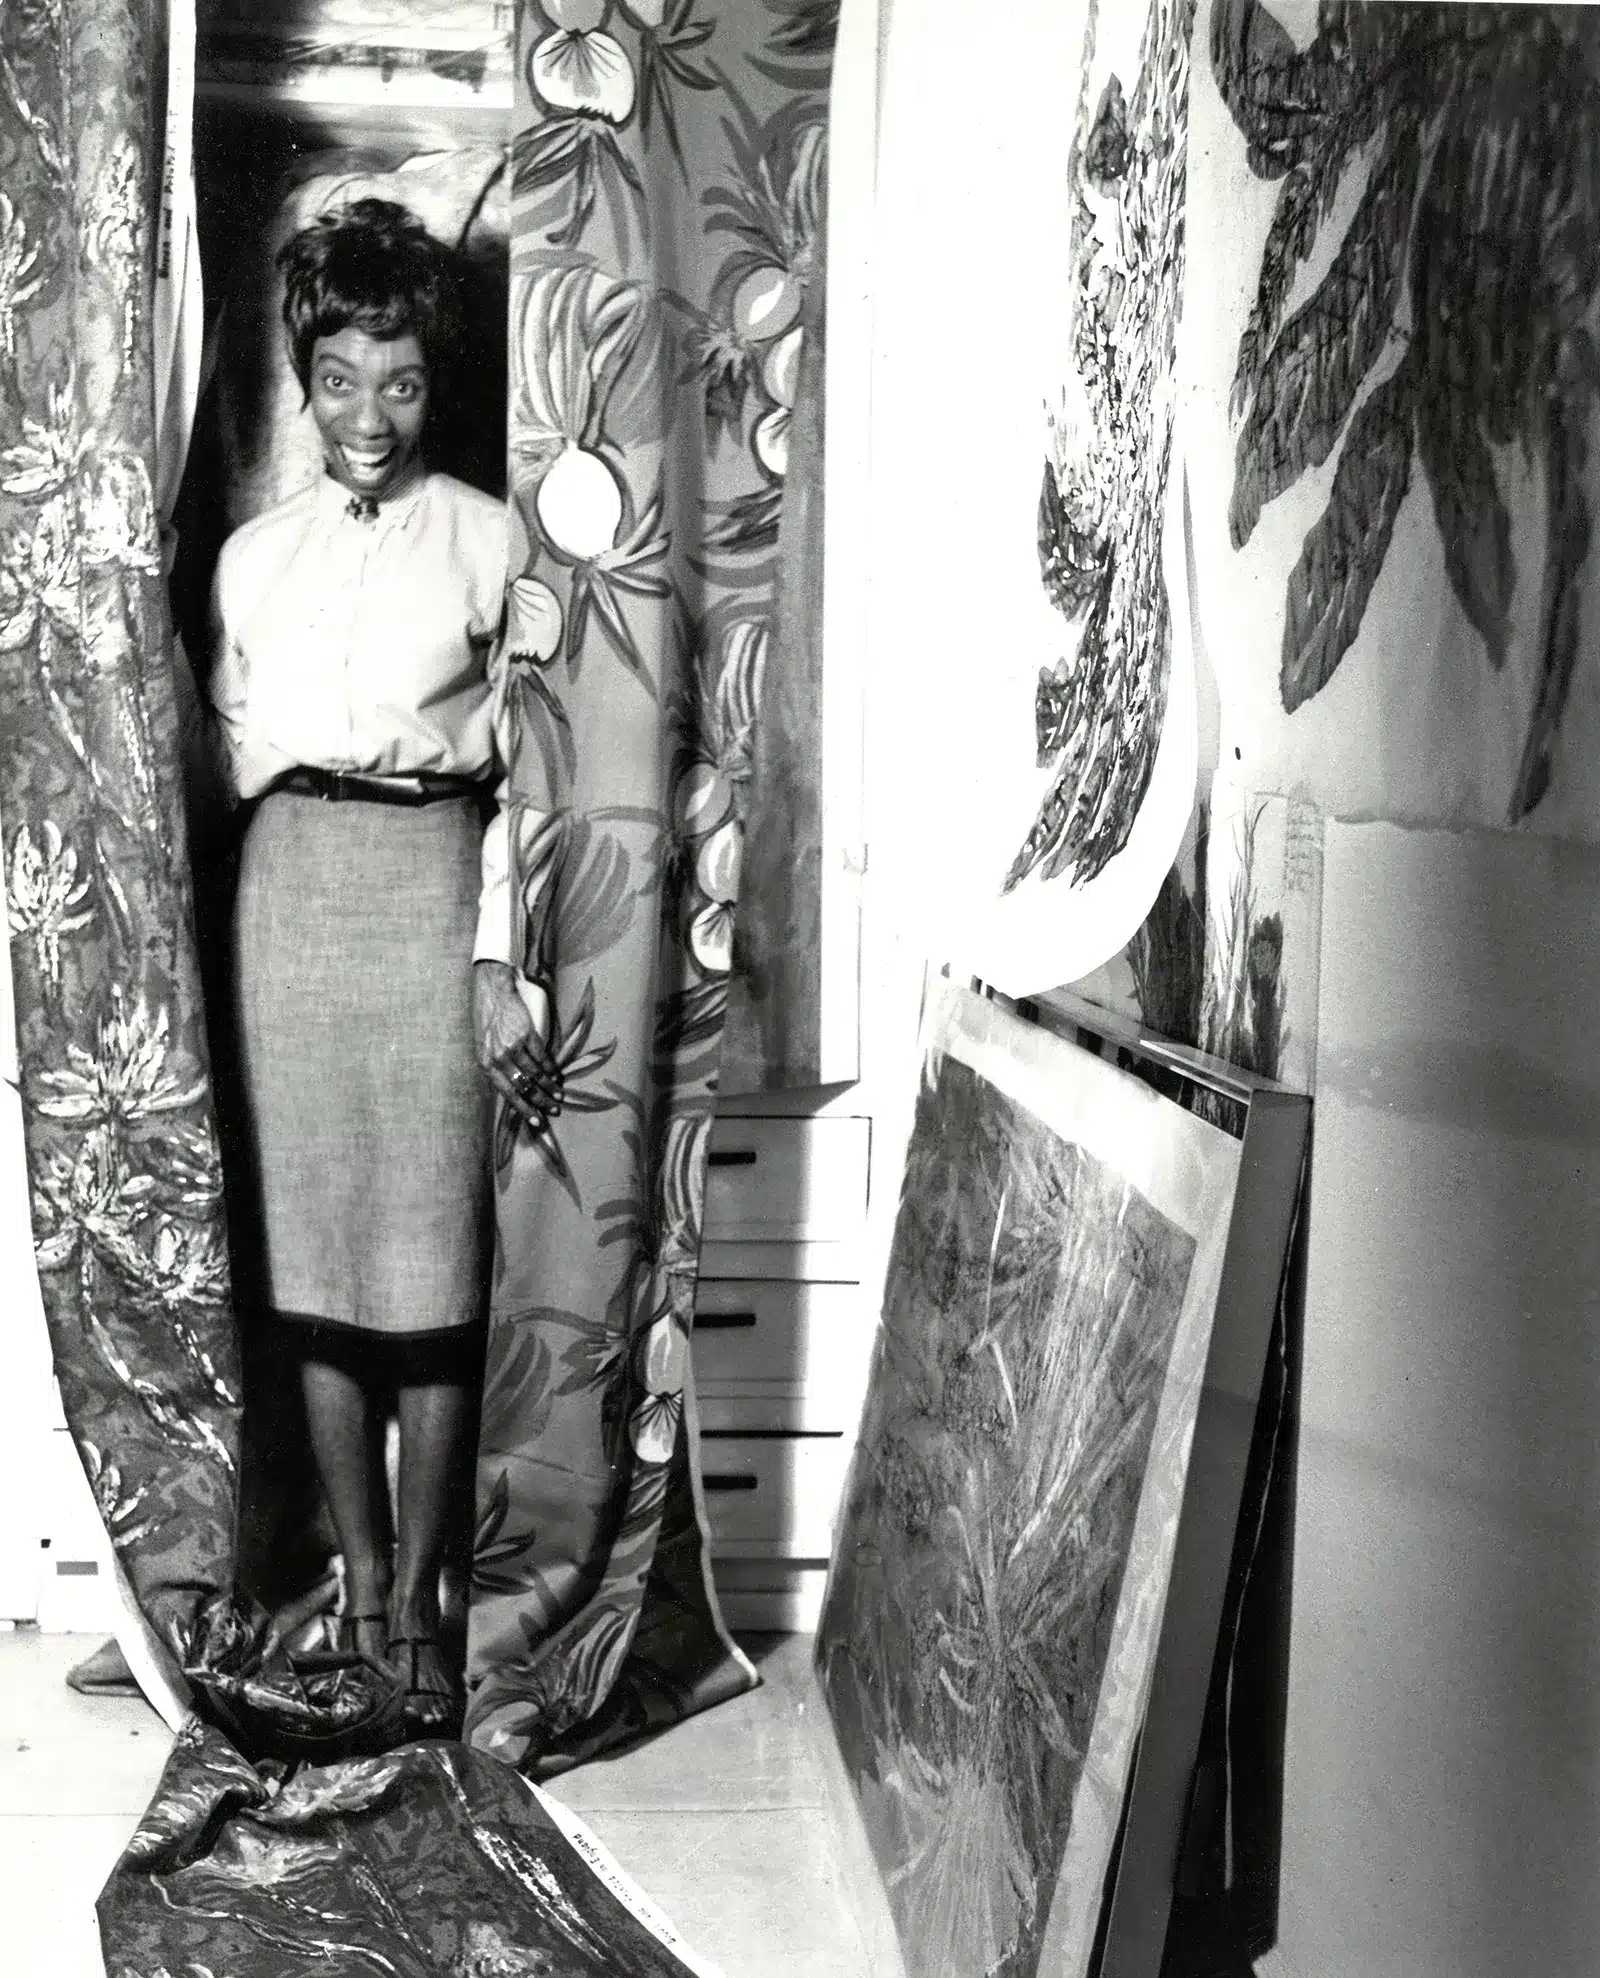 A black and white photo of a woman standing in front of a curtain.